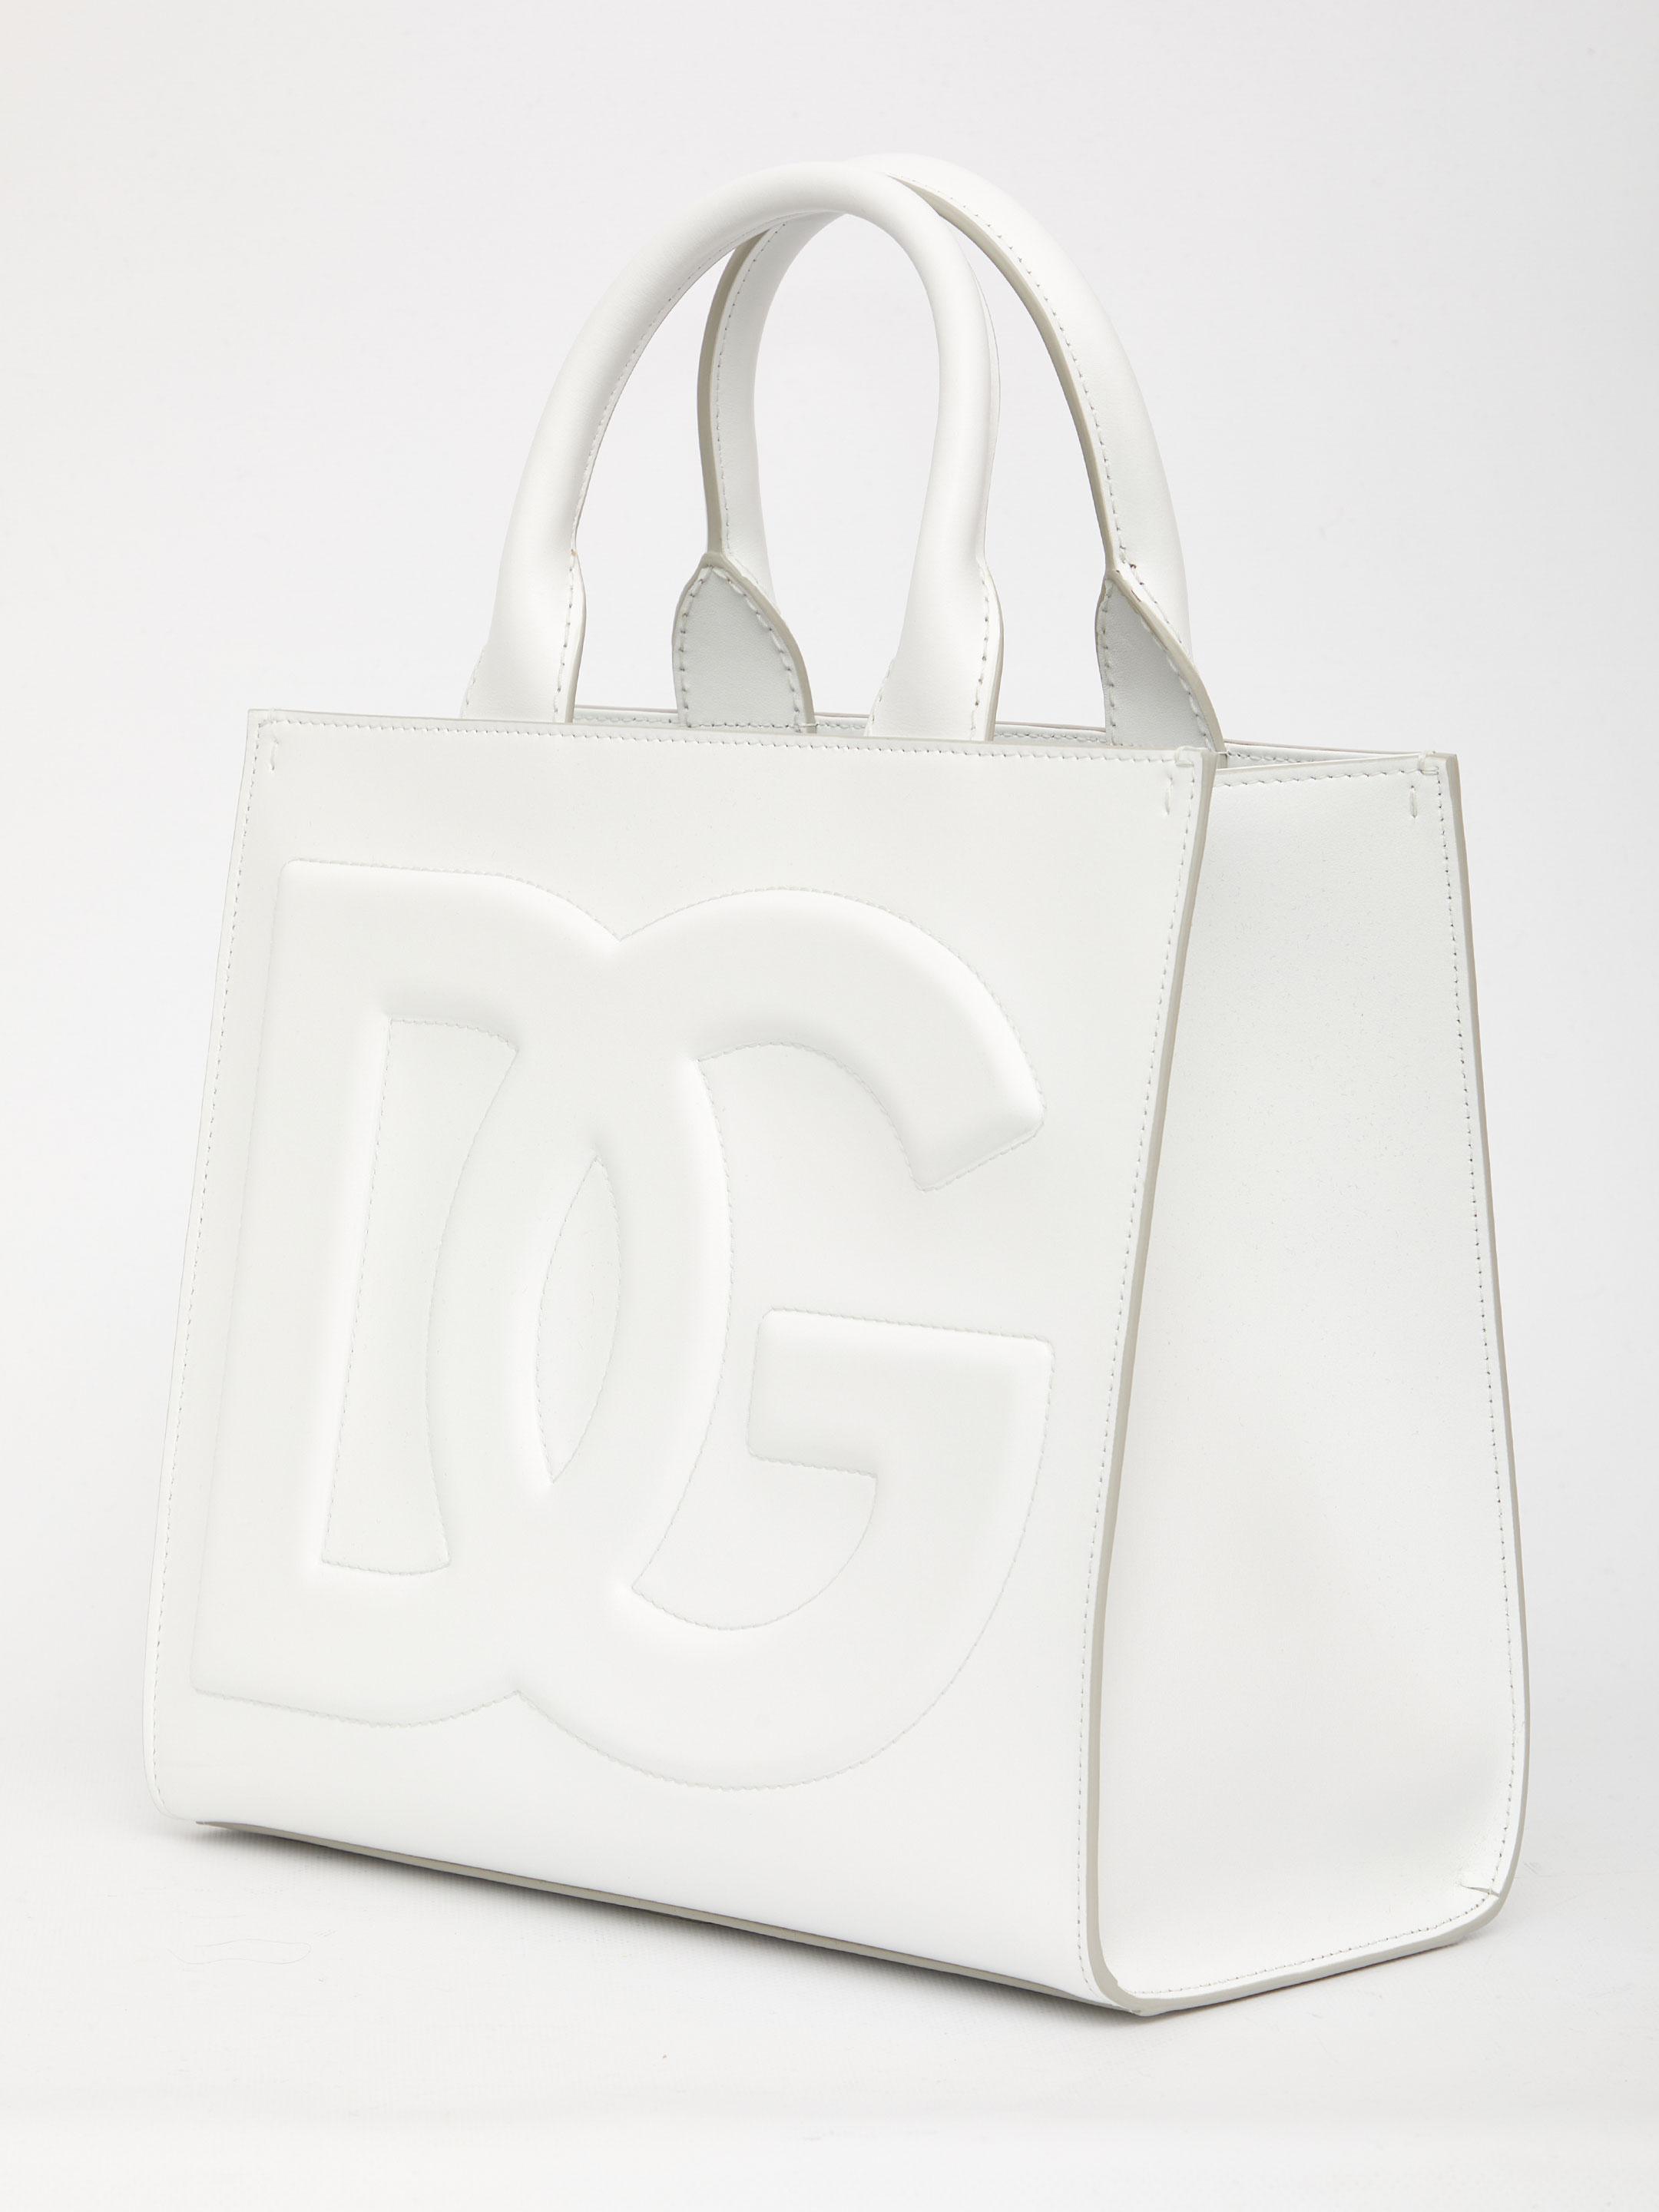 Women's Dg Daily Small Tote Bag by Dolce & Gabbana